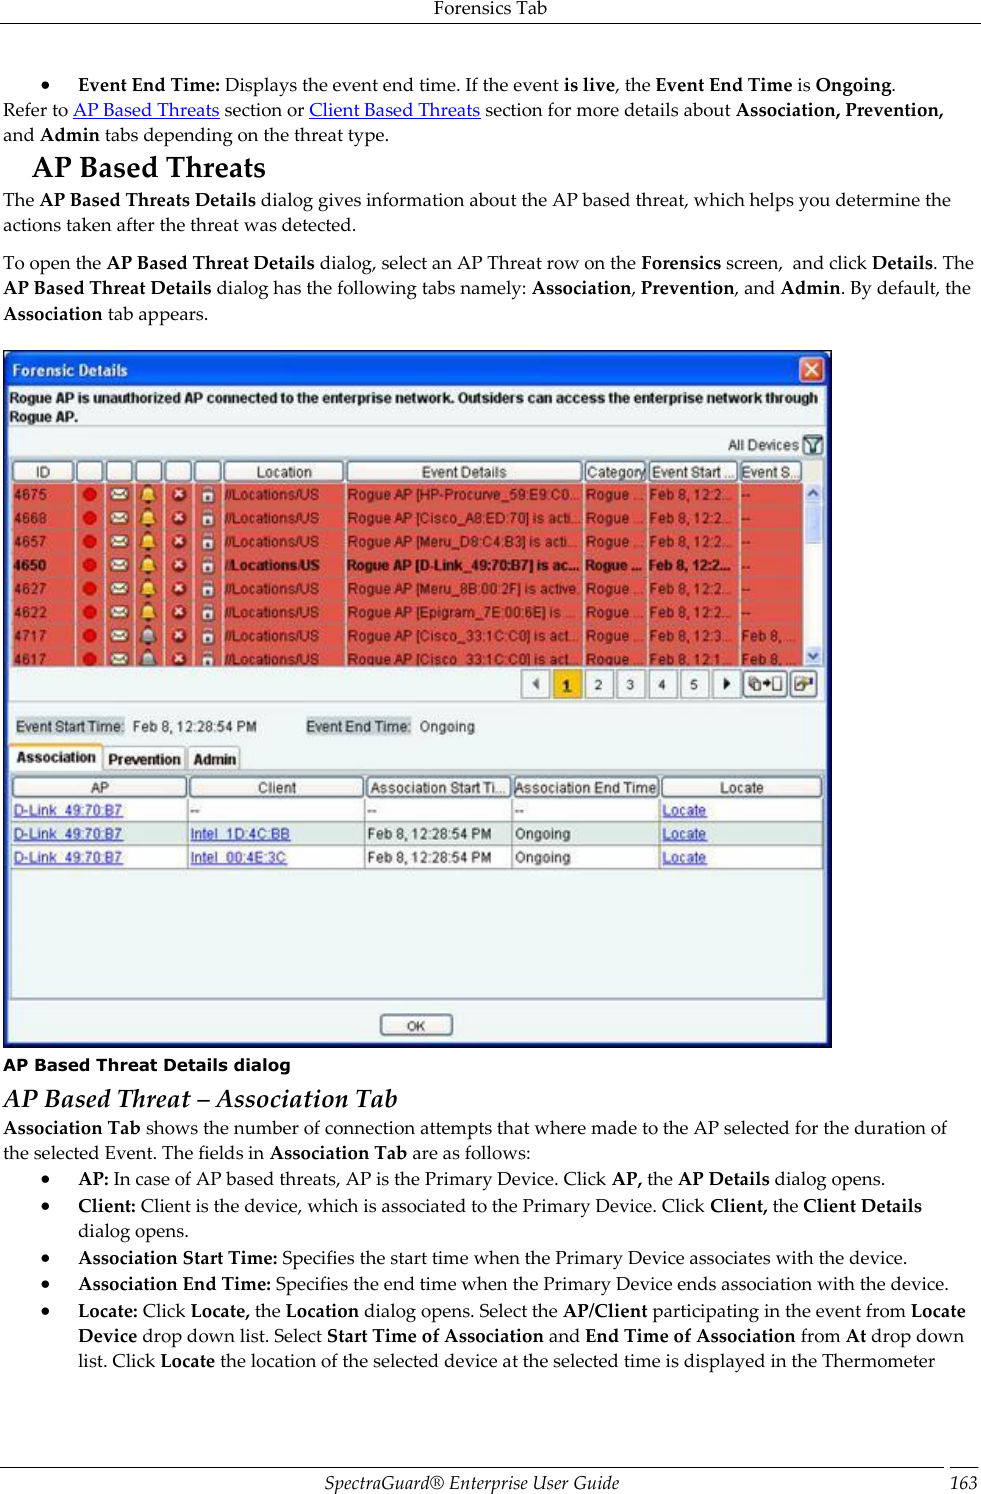 Forensics Tab SpectraGuard®  Enterprise User Guide 163  Event End Time: Displays the event end time. If the event is live, the Event End Time is Ongoing. Refer to AP Based Threats section or Client Based Threats section for more details about Association, Prevention, and Admin tabs depending on the threat type. AP Based Threats The AP Based Threats Details dialog gives information about the AP based threat, which helps you determine the actions taken after the threat was detected. To open the AP Based Threat Details dialog, select an AP Threat row on the Forensics screen,  and click Details. The AP Based Threat Details dialog has the following tabs namely: Association, Prevention, and Admin. By default, the Association tab appears.    AP Based Threat Details dialog AP Based Threat – Association Tab Association Tab shows the number of connection attempts that where made to the AP selected for the duration of the selected Event. The fields in Association Tab are as follows:  AP: In case of AP based threats, AP is the Primary Device. Click AP, the AP Details dialog opens.  Client: Client is the device, which is associated to the Primary Device. Click Client, the Client Details dialog opens.  Association Start Time: Specifies the start time when the Primary Device associates with the device.  Association End Time: Specifies the end time when the Primary Device ends association with the device.  Locate: Click Locate, the Location dialog opens. Select the AP/Client participating in the event from Locate Device drop down list. Select Start Time of Association and End Time of Association from At drop down list. Click Locate the location of the selected device at the selected time is displayed in the Thermometer 